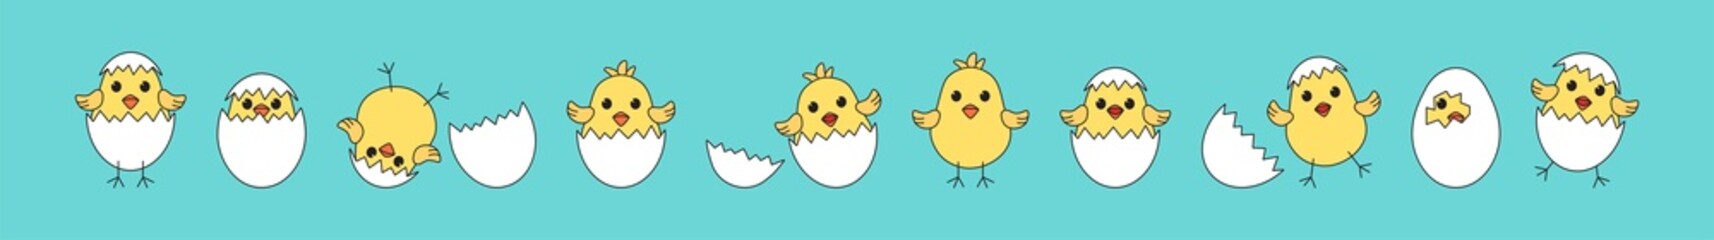 Chick Easter vector, cartoon eggand chicken baby, cute little bird, yellow funny animal set on blue background. Simple drawing illustration